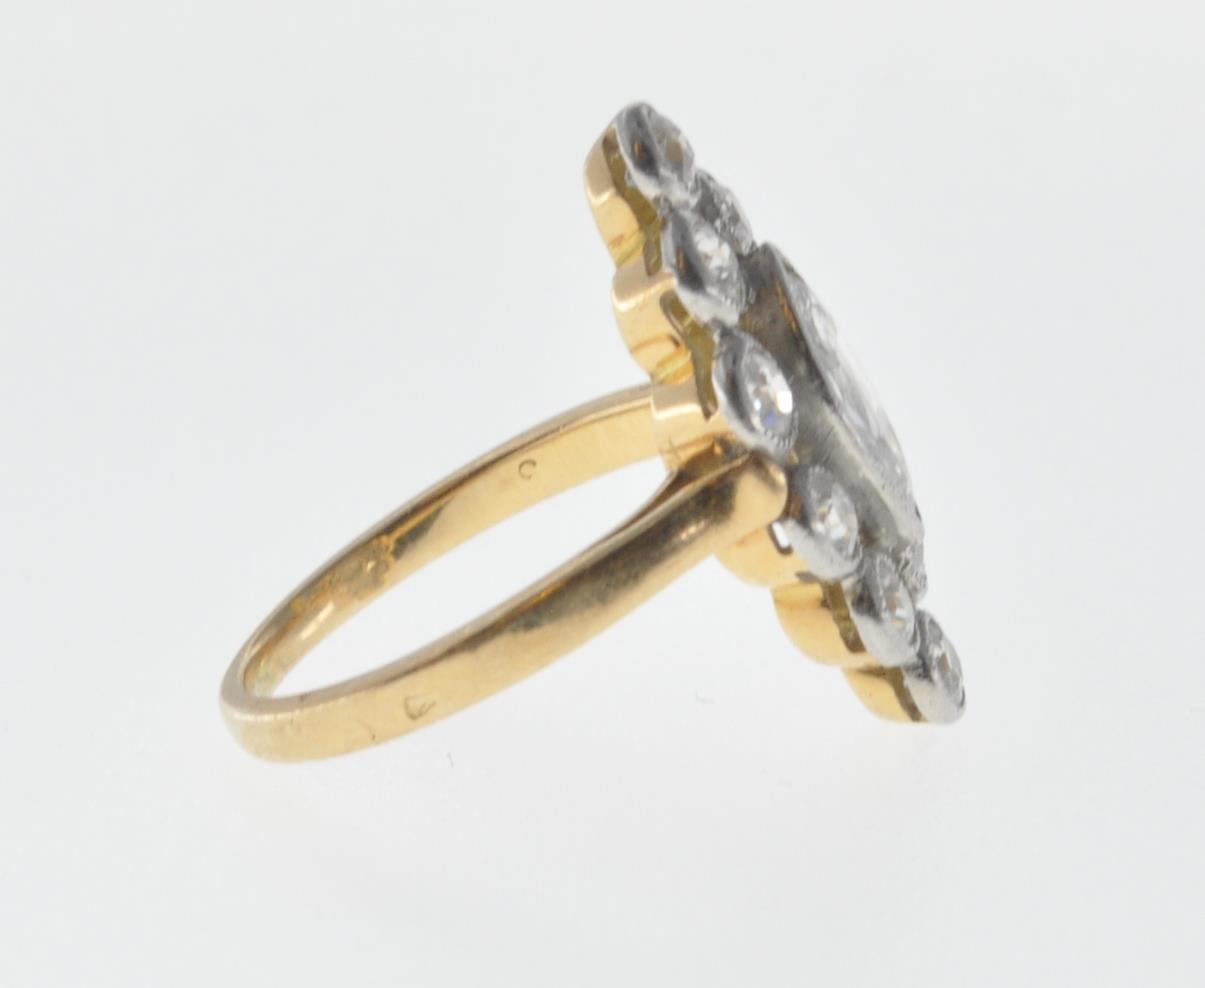 FRENCH GOLD AND DIAMOND MARQUISE RING - Image 4 of 6